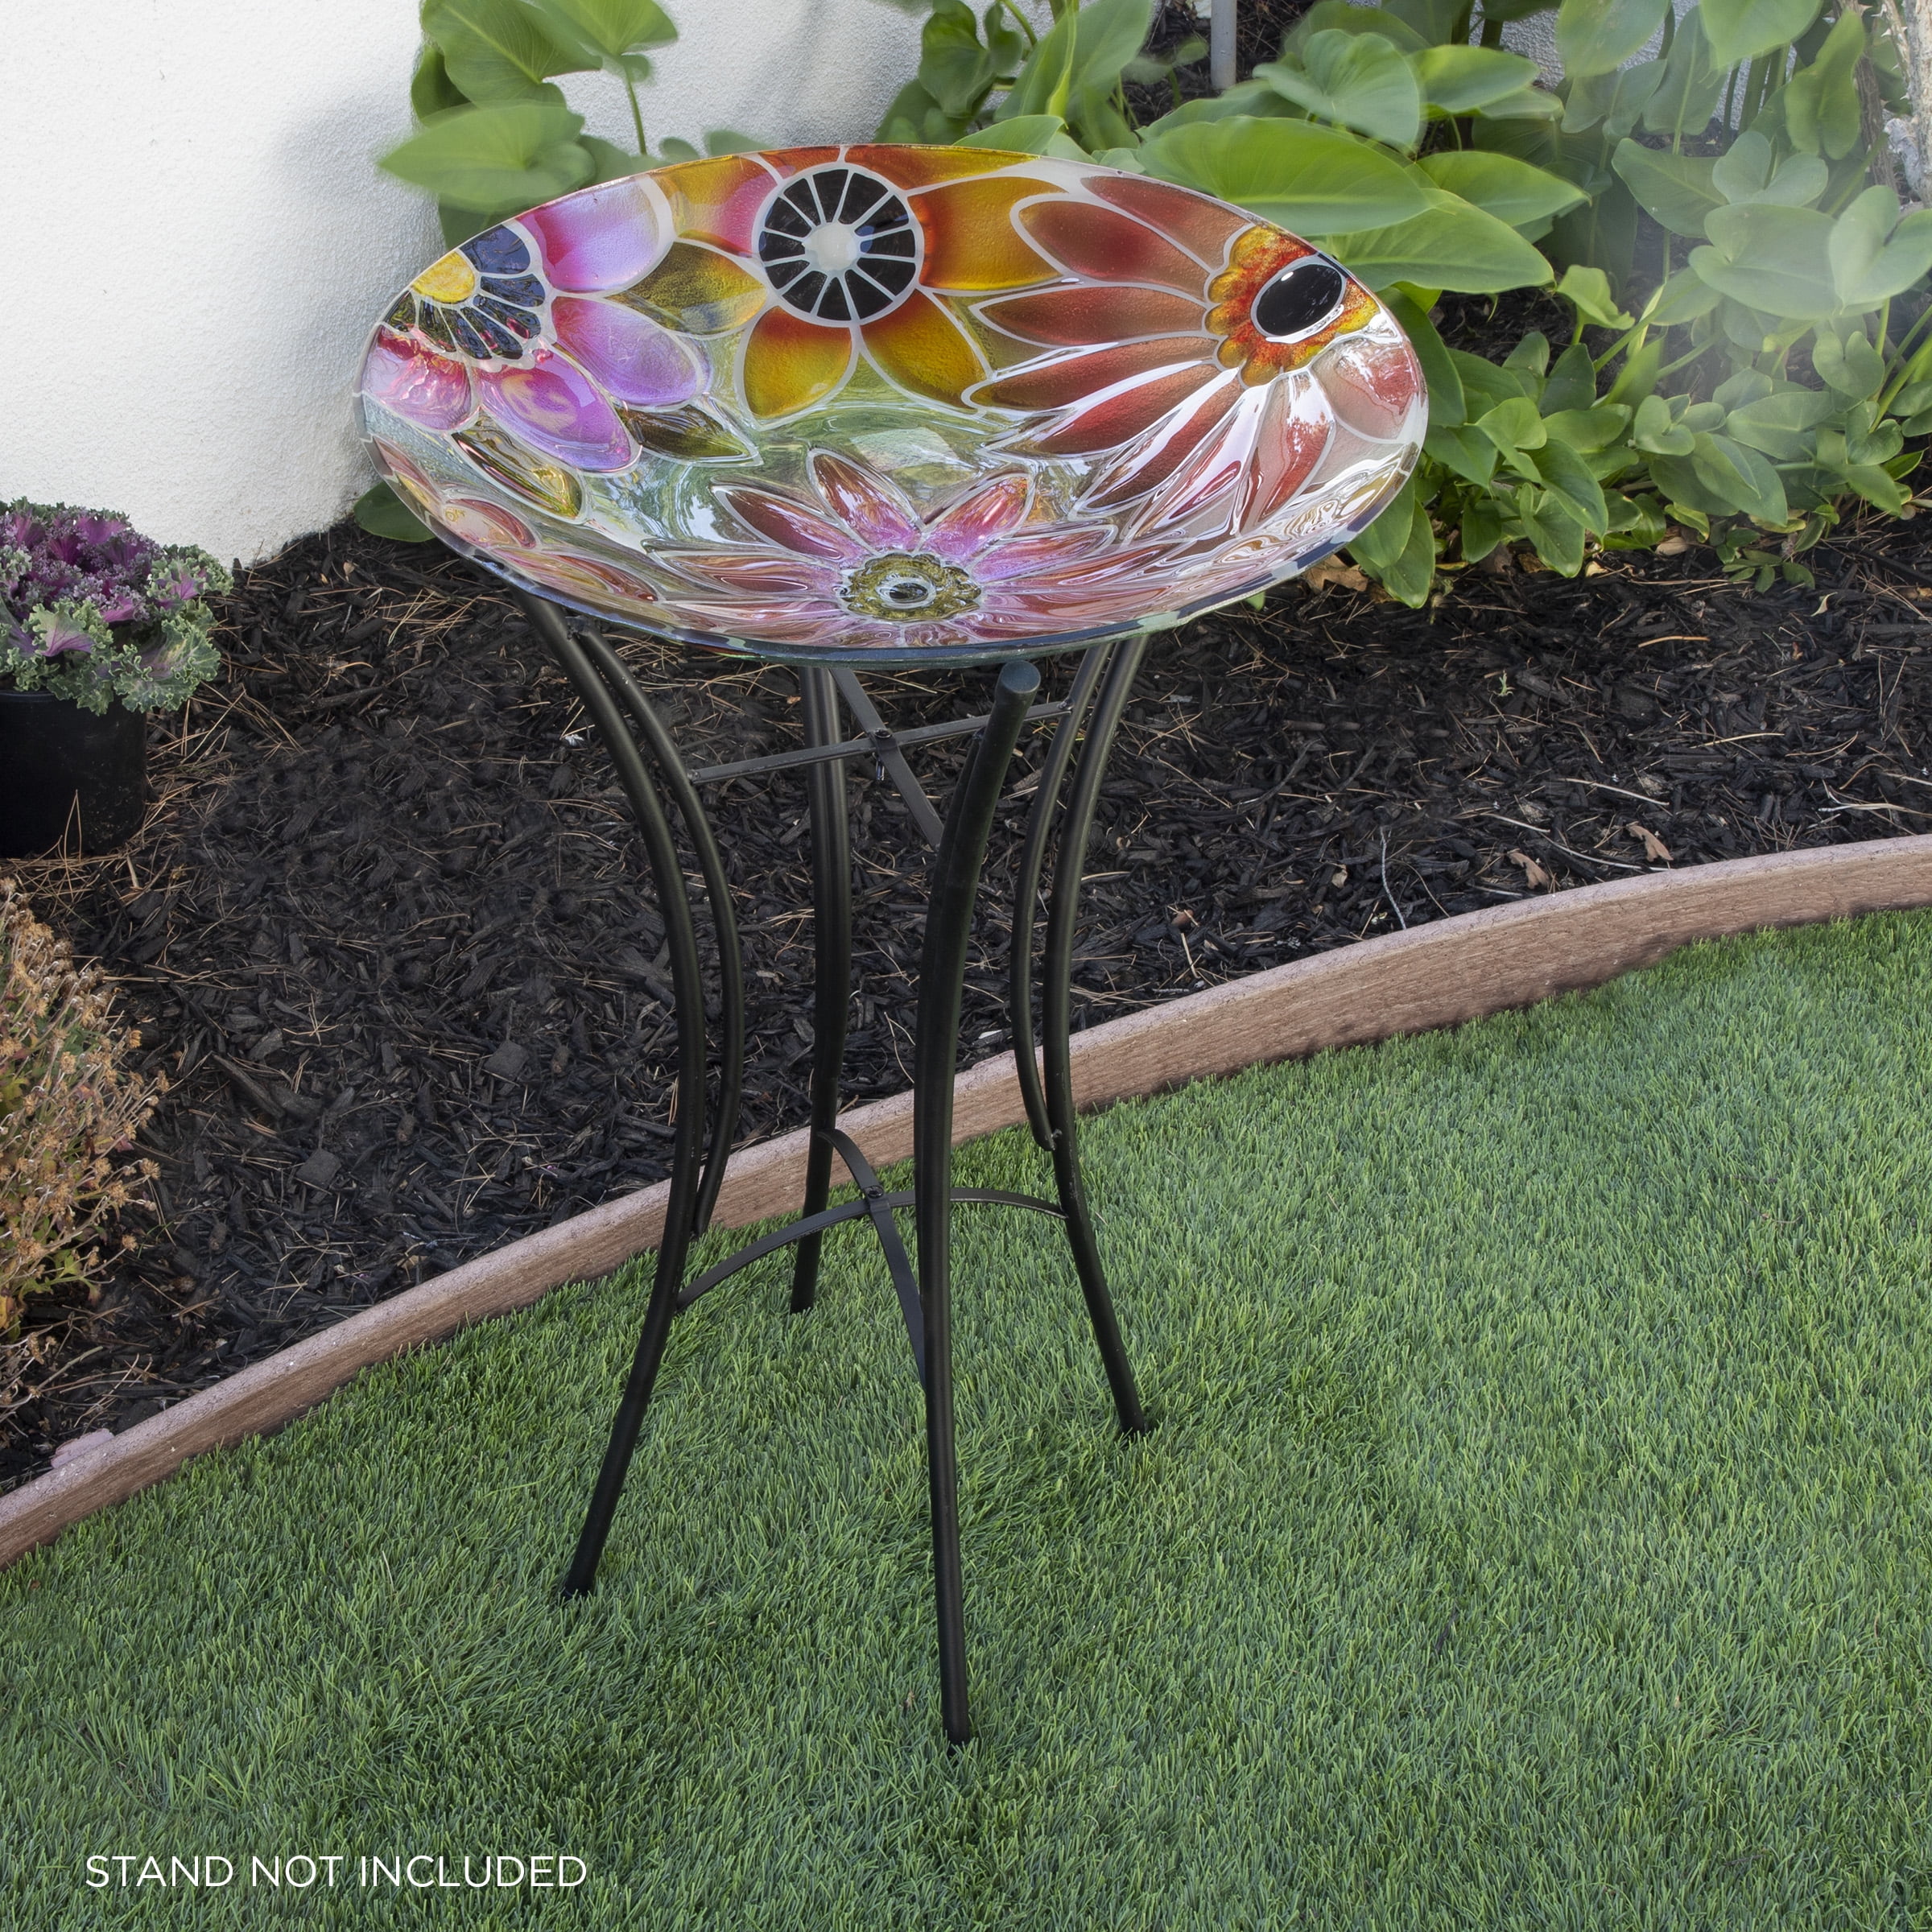 Picture of Alpine KPP604T-18 18 in. Glass Birdbath with Colorful Flowers Paint Finish